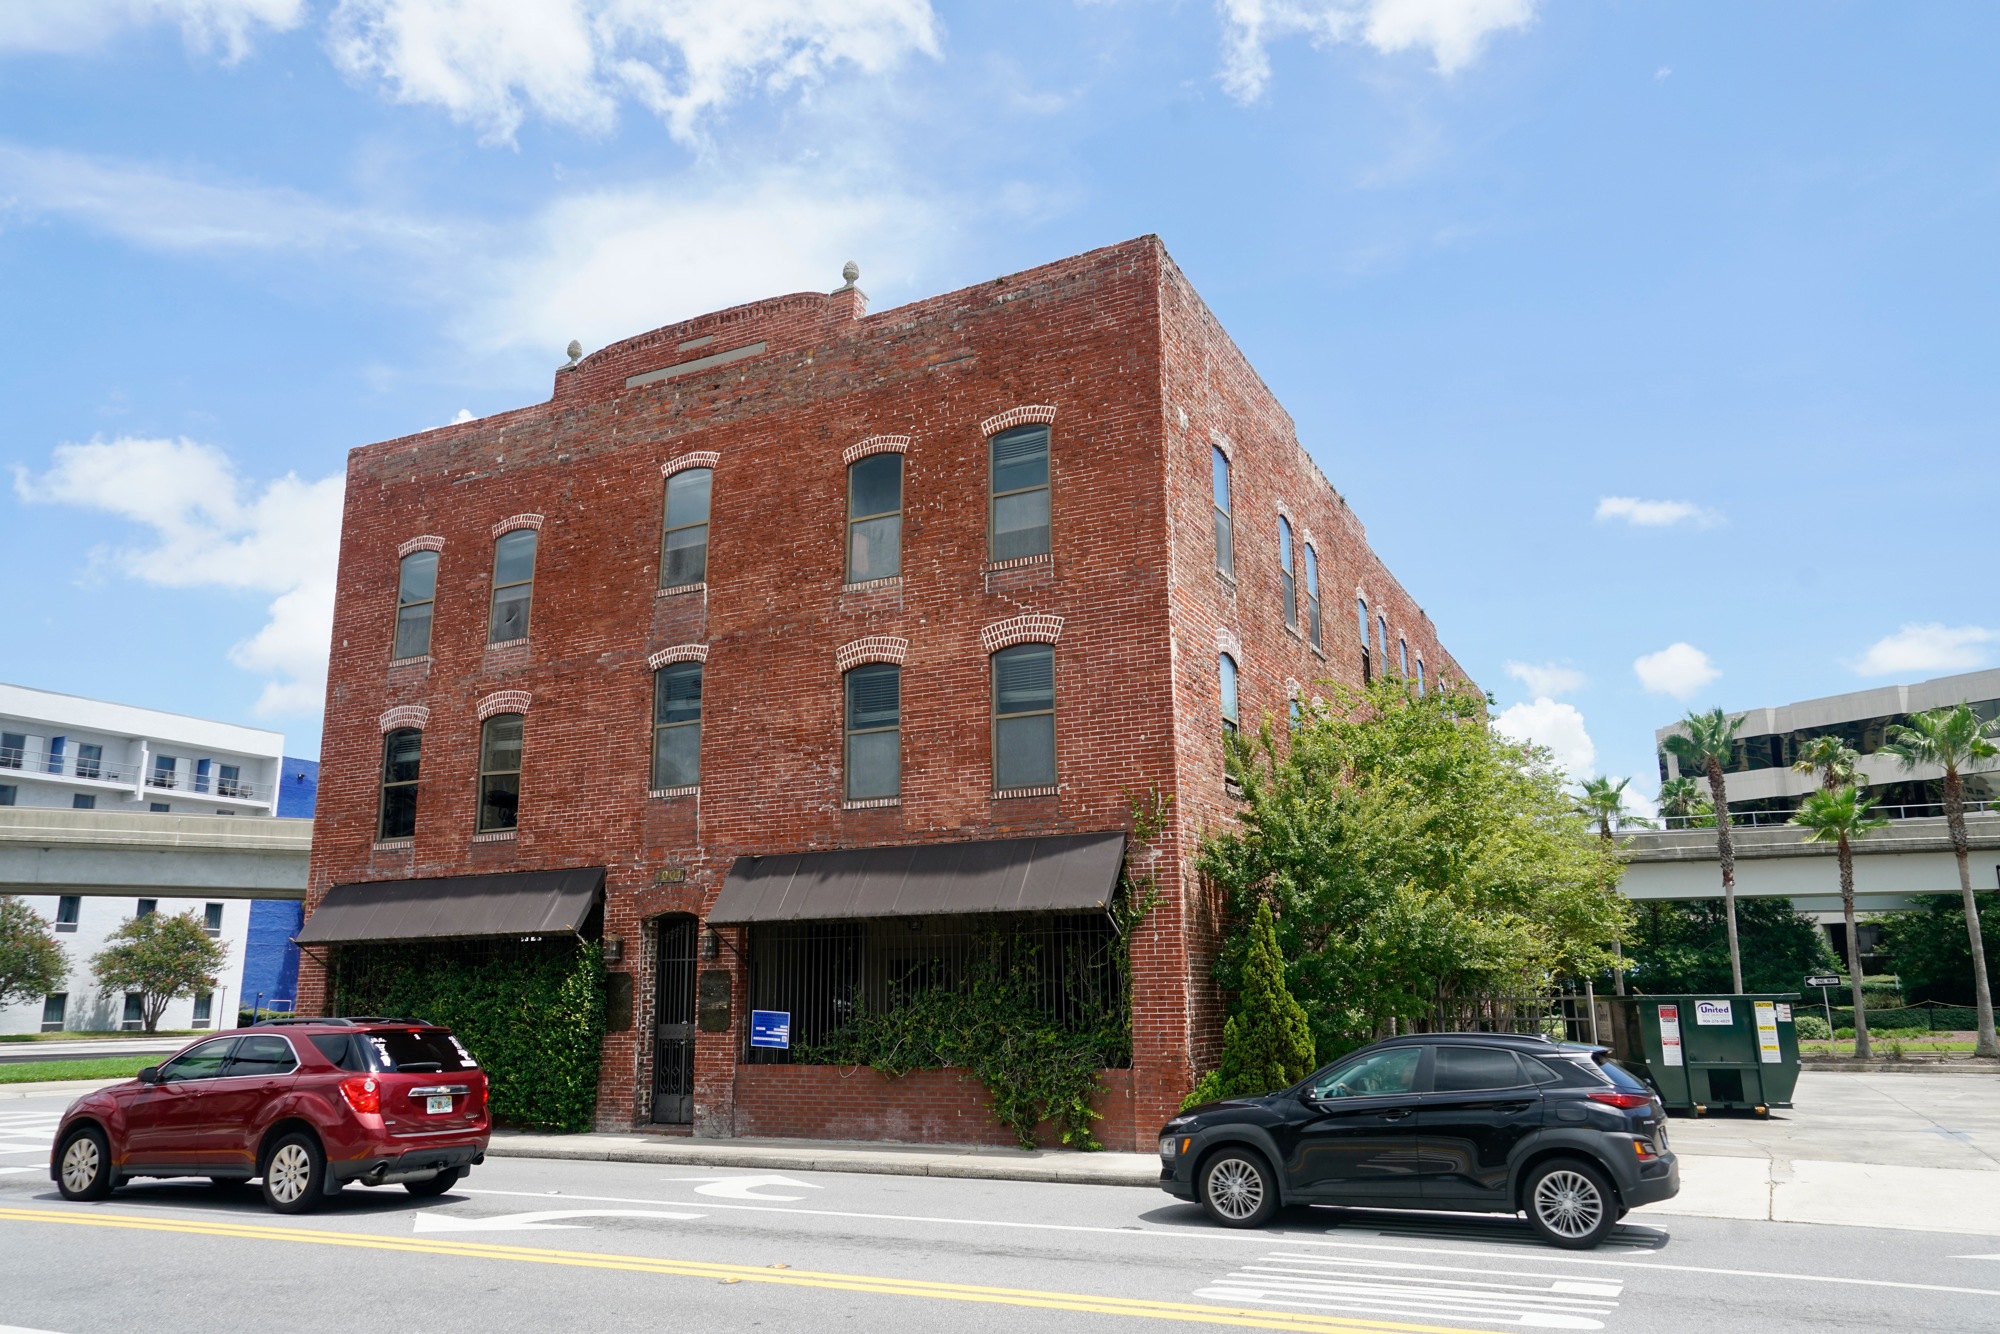 The owners of Industry West along with Corner Lot Companies paid $2.25 million in July for the building at 1001 Kings Ave. on the Downtown Southbank.